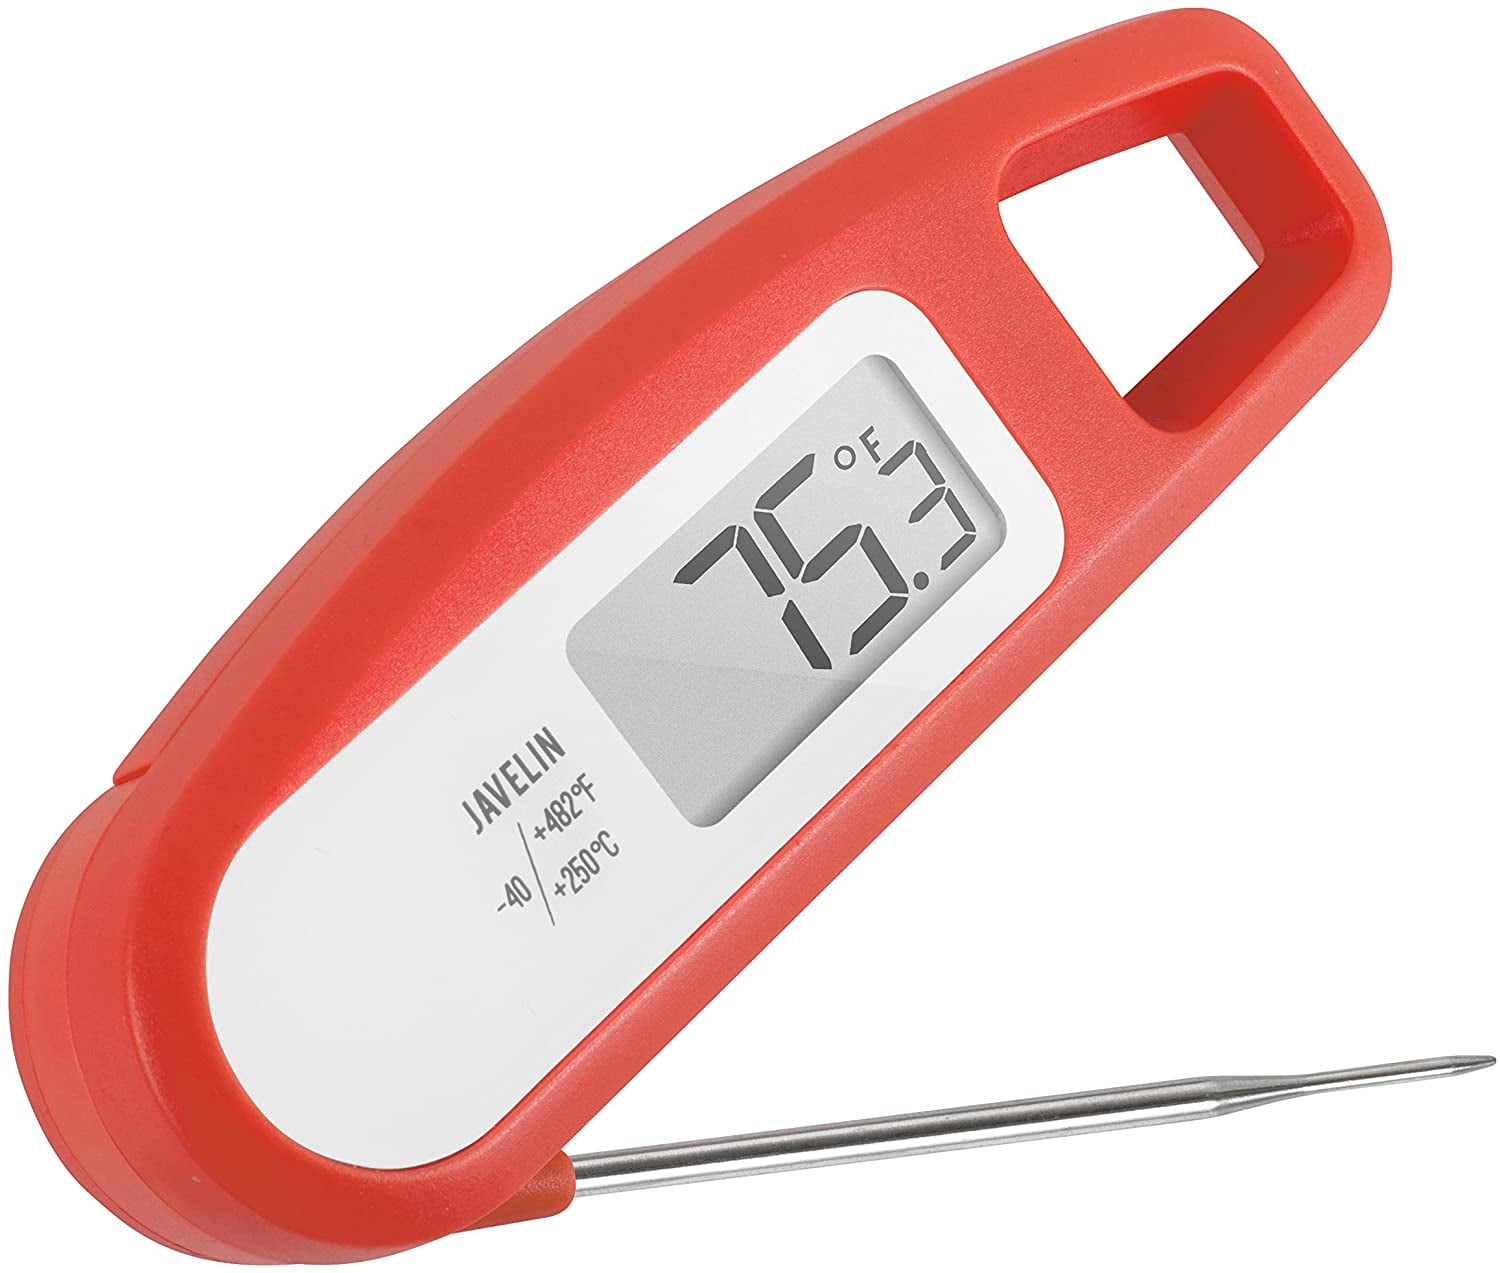 Lavatools Pt18c Professional Commercial 3 Ambidextrous Backlit Digital Instant Read Meat Thermometer for Kitchen, Food Cooking, Grill, BBQ, Smoker, C